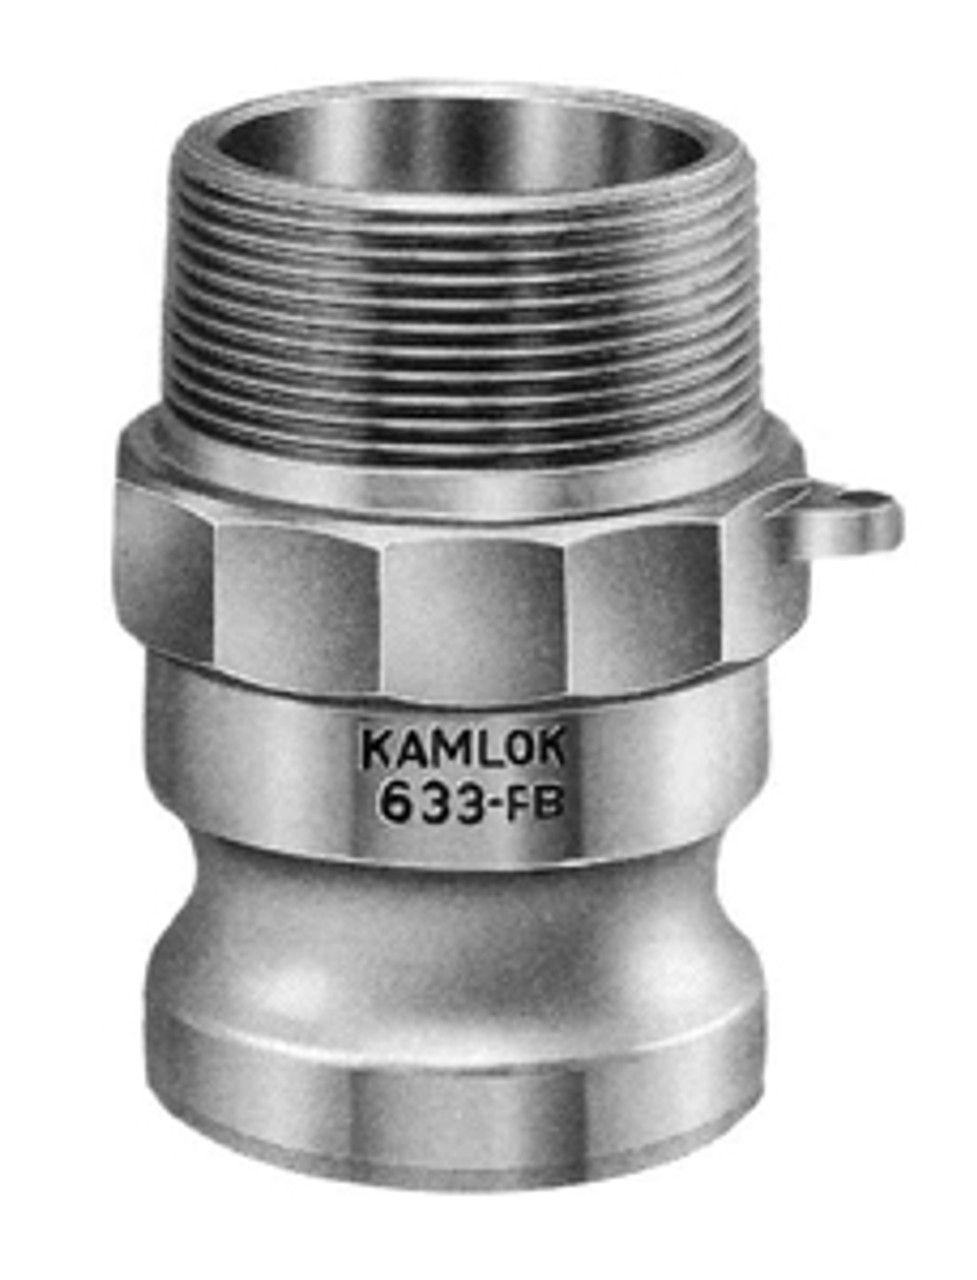 IMPA 351751 CAM & GROOVE MALE ADAPTER PART F LM 1/2" BSP MALE